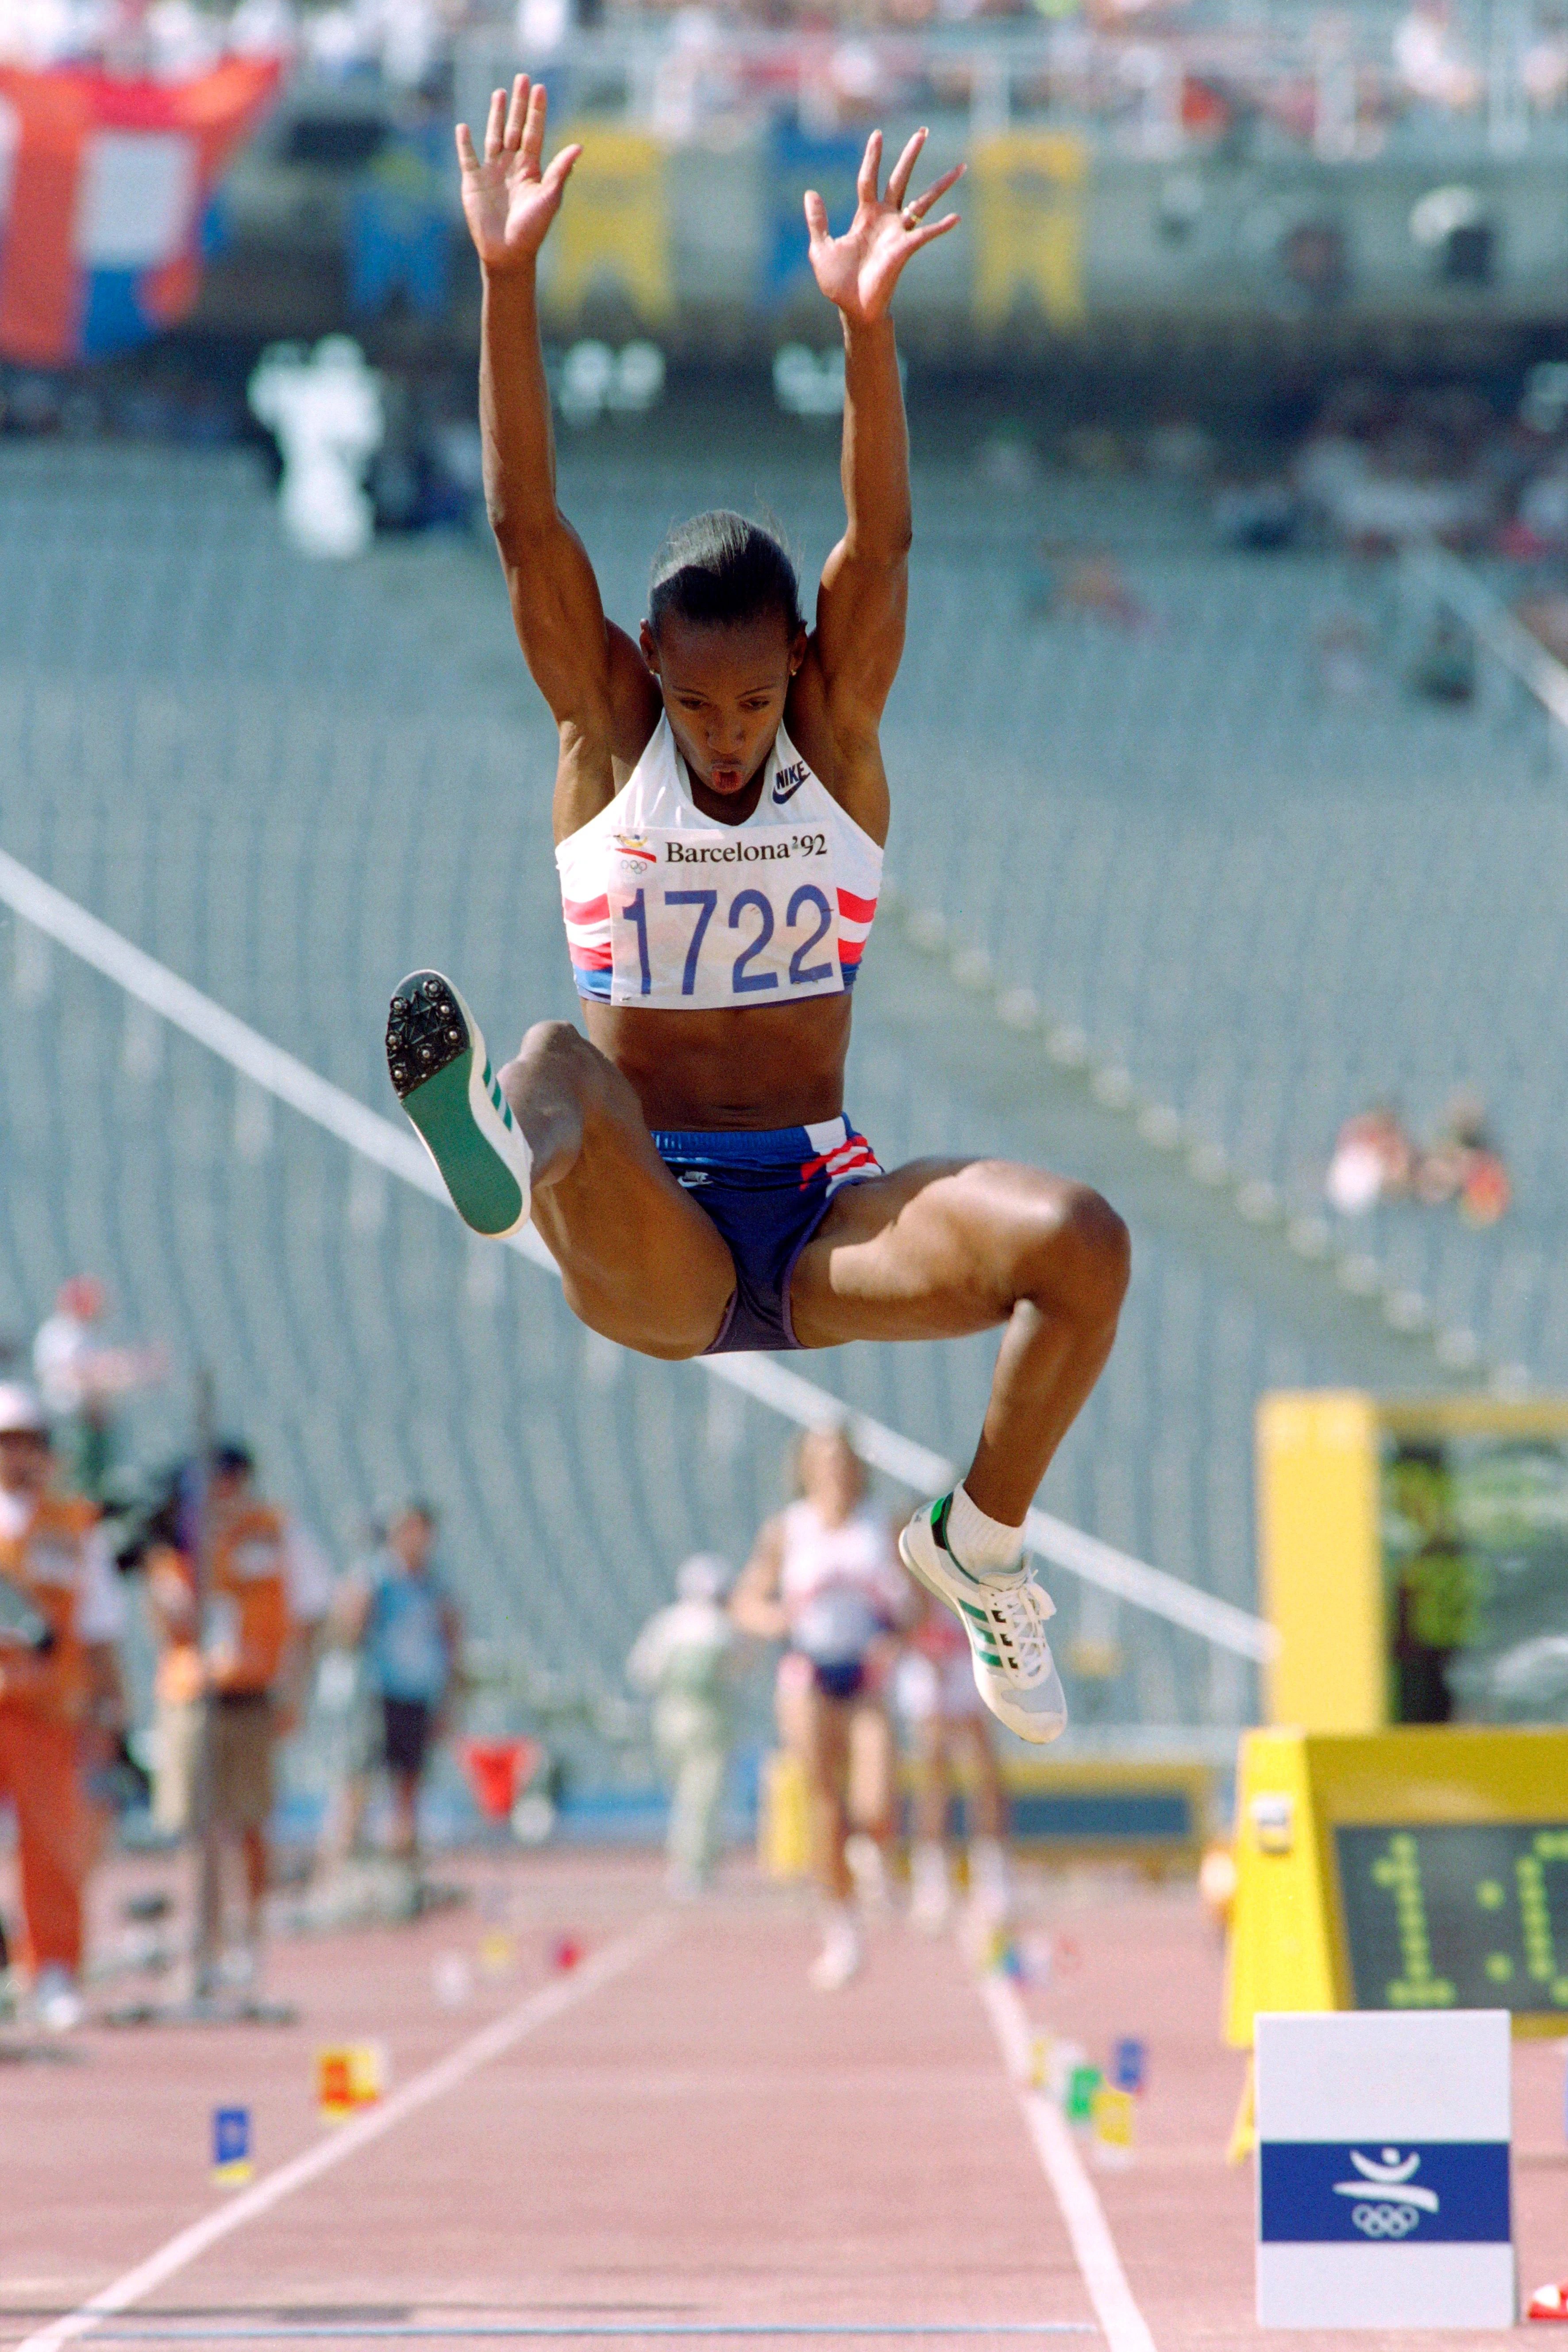 Jackie JoynerKersee On The Possibility Of Someone Beating Her World Record